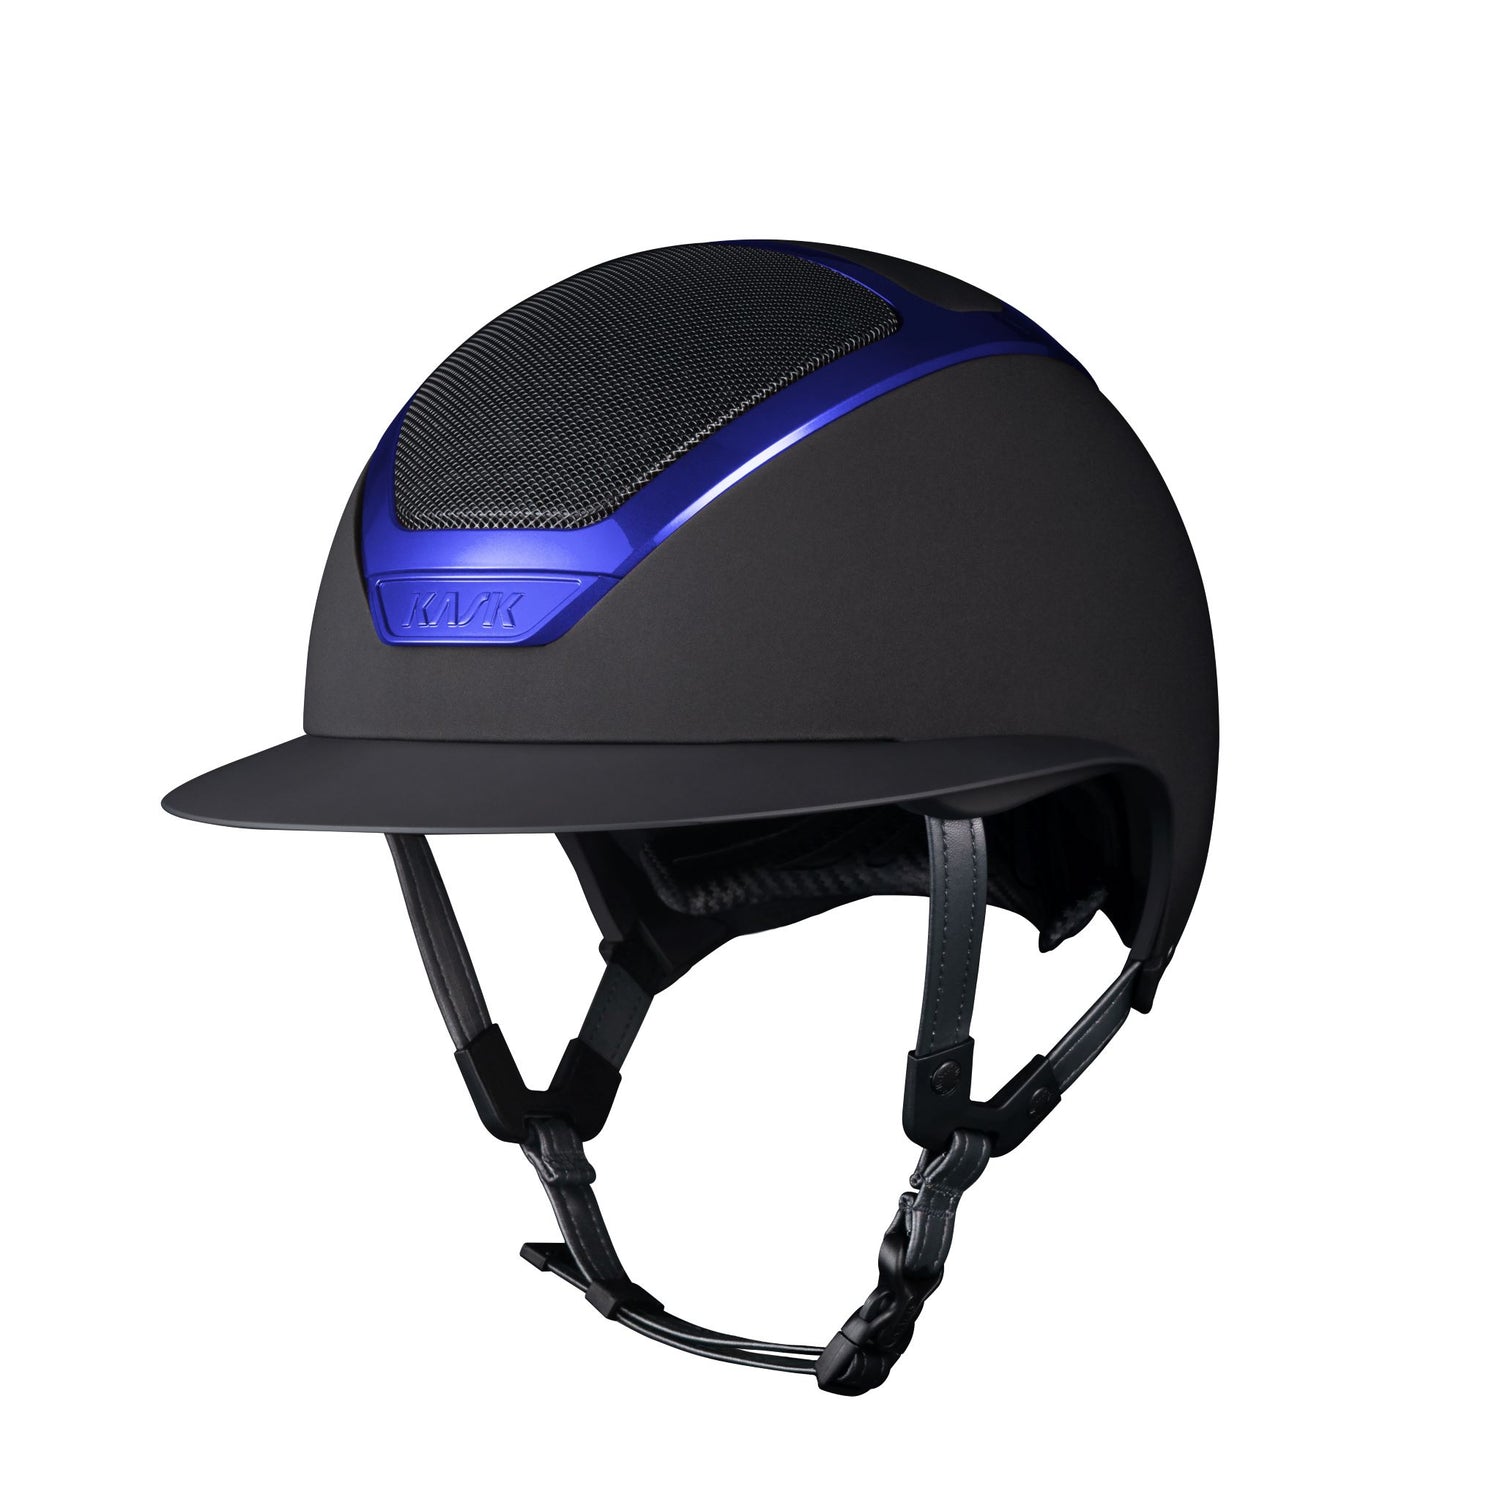 Equestrian Helmet with bright blue